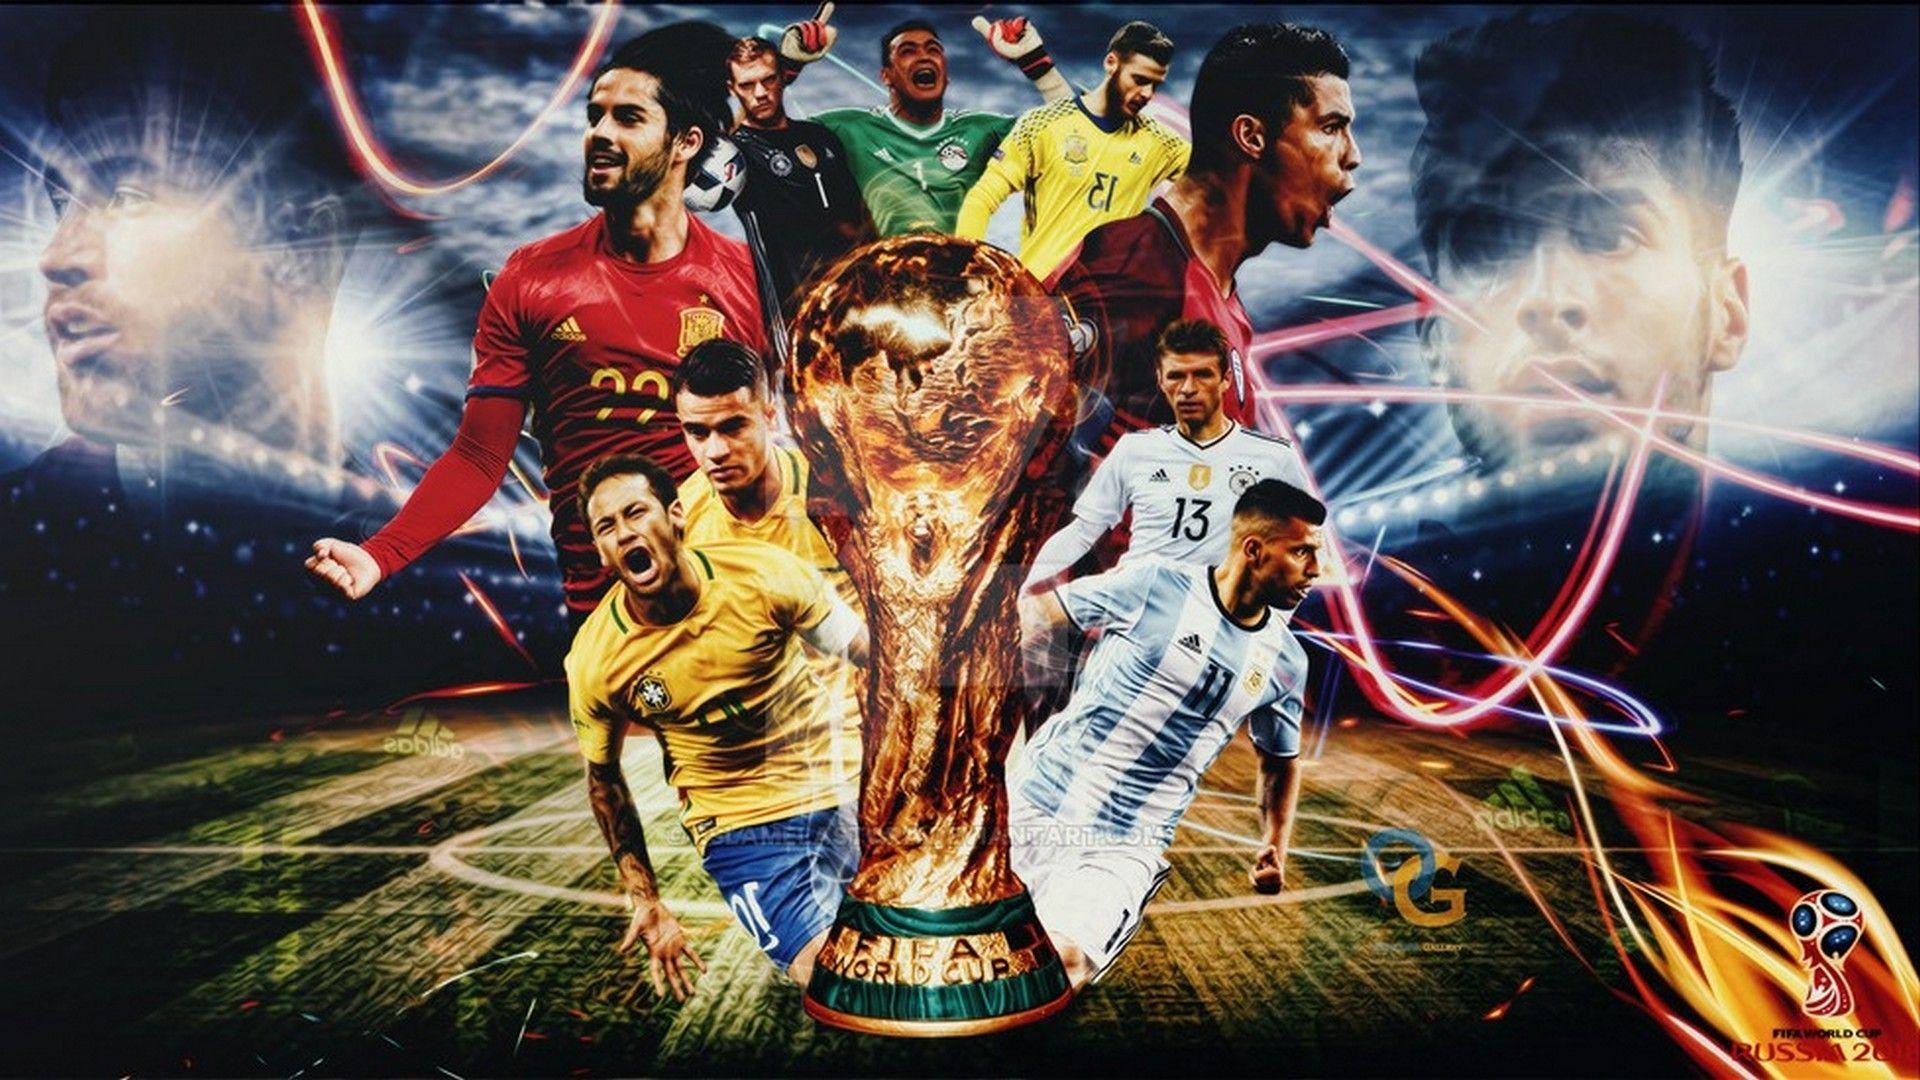 Wallpaper HD 2018 World Cup Wallpaper HD. World cup russia World cup, World cup live